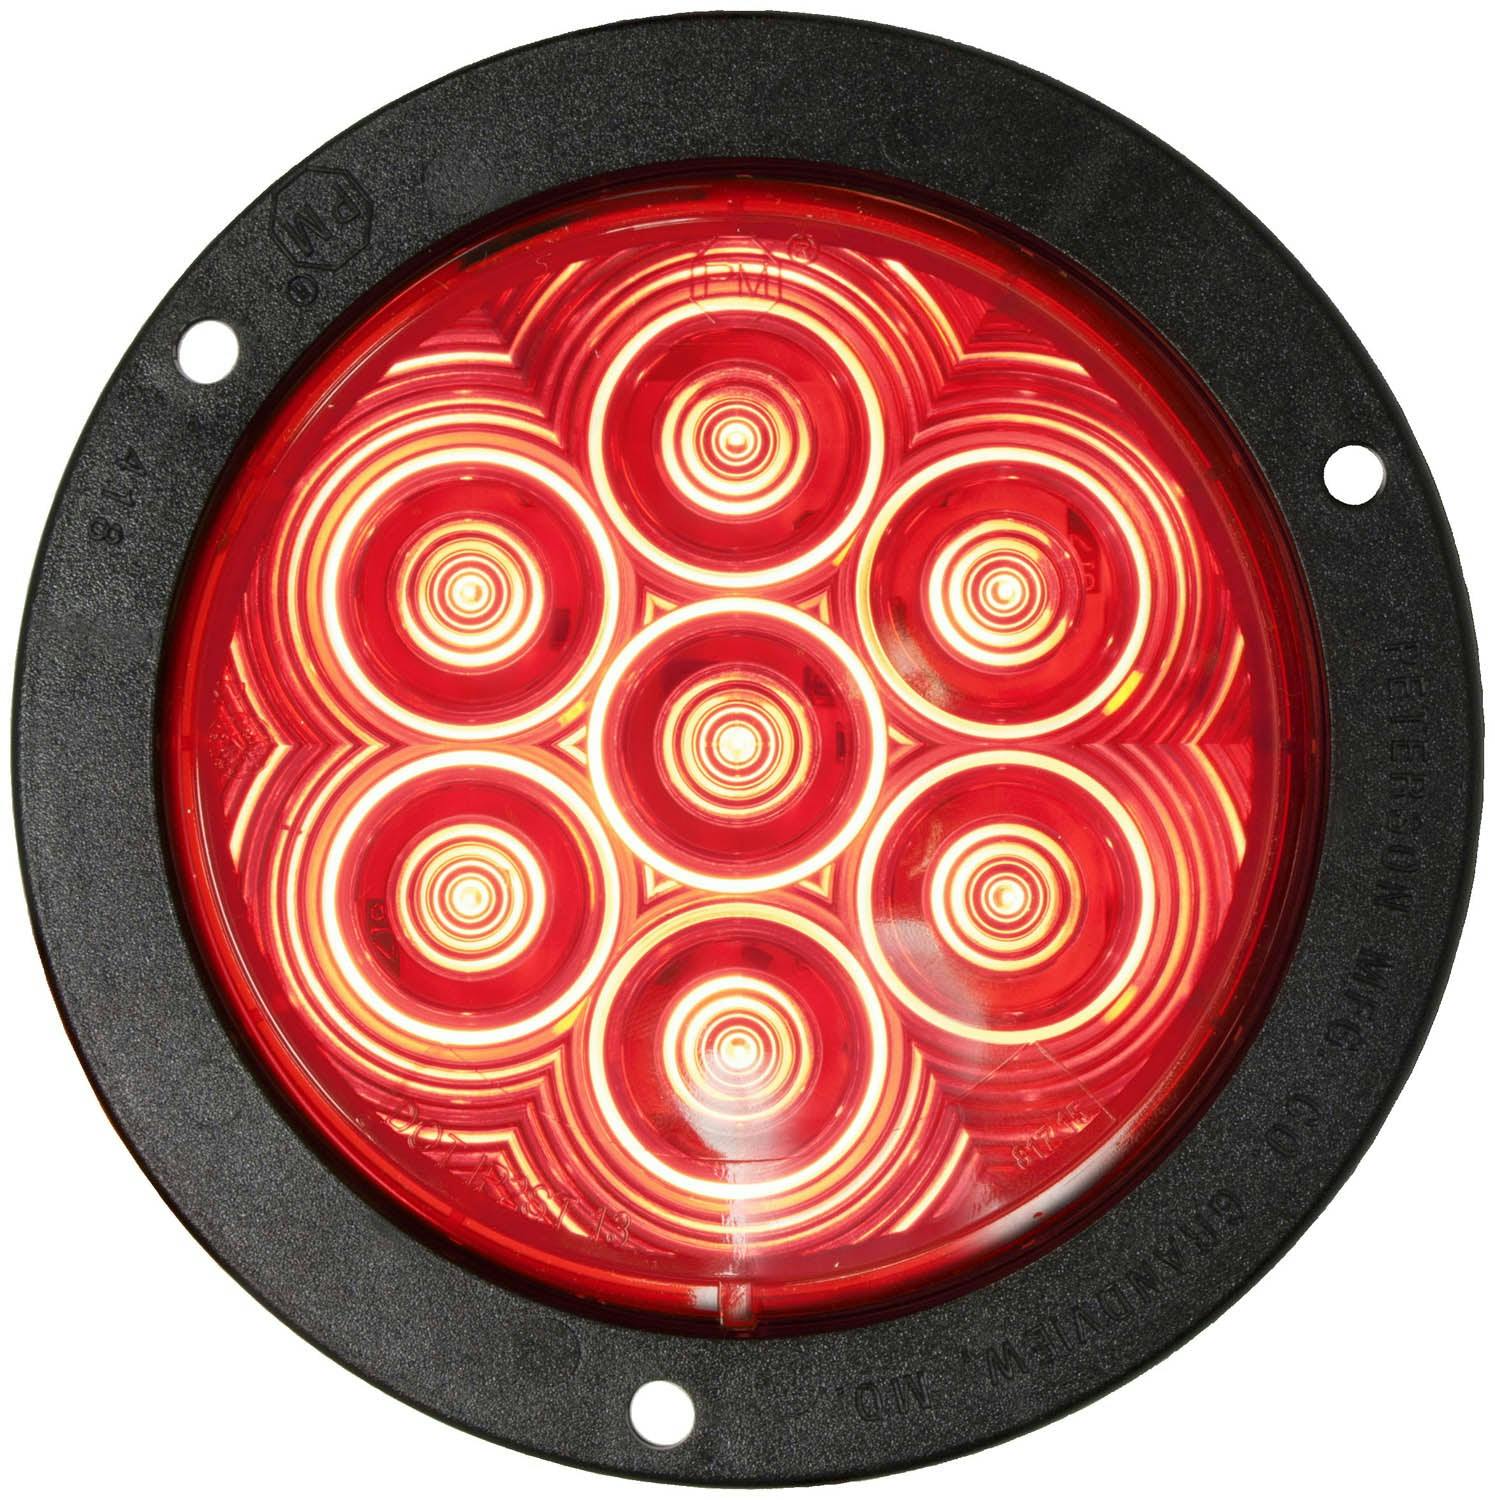 LED Stop/Turn/Tail, Round, Flange-Mount Kit, 4", red (Pack of 6) - 818R-7_cdd15a65-3acd-48f9-9295-4d4446268112